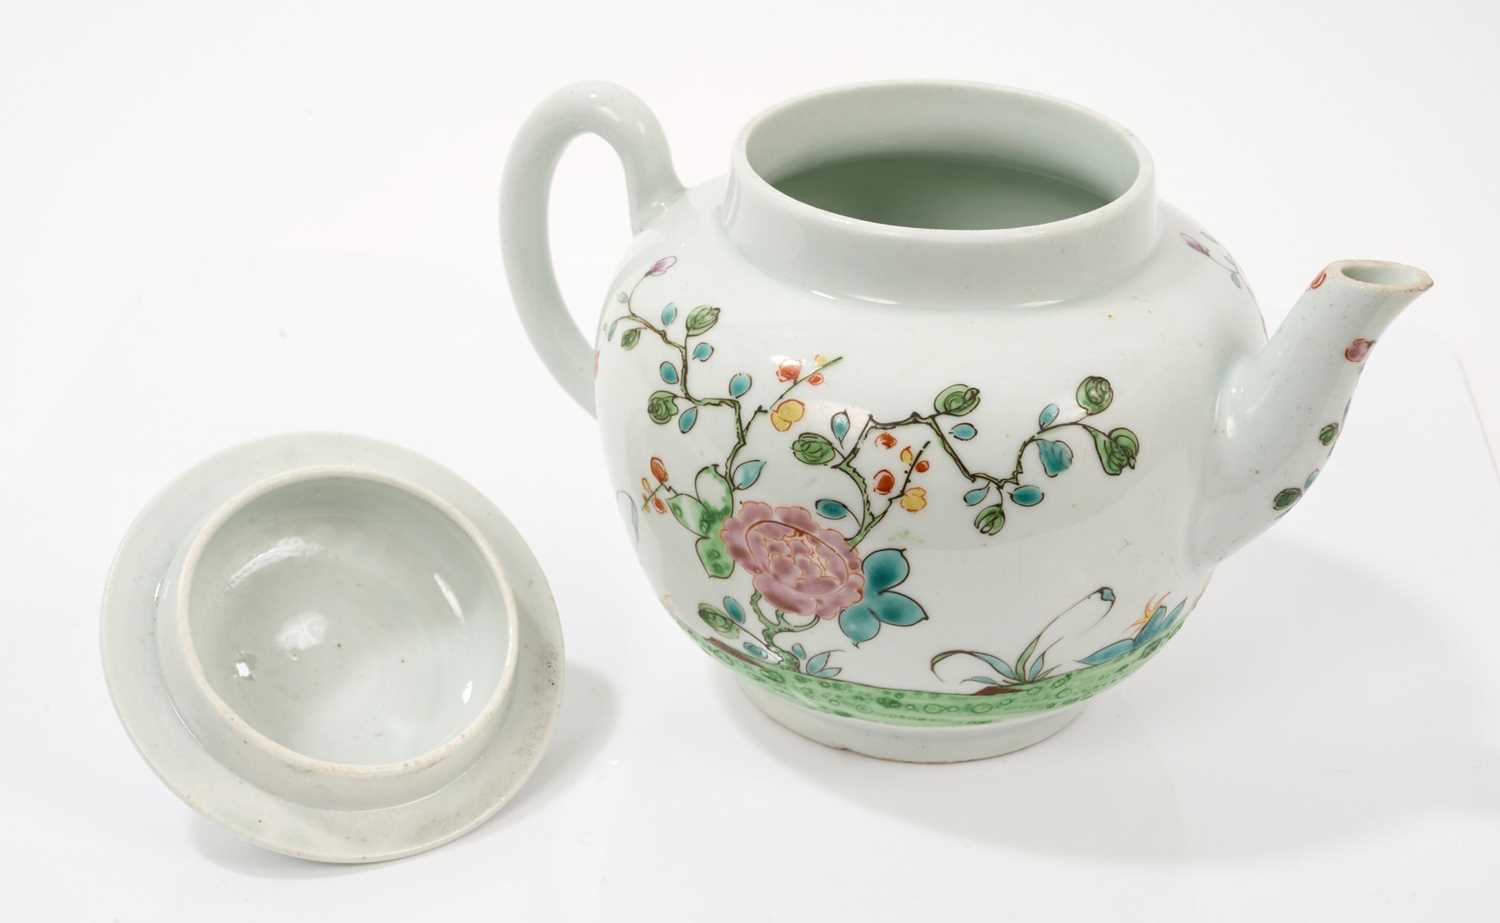 Rare Worcester globular teapot and cover, painted in Chinese famille rose palette with two geese in - Image 2 of 3